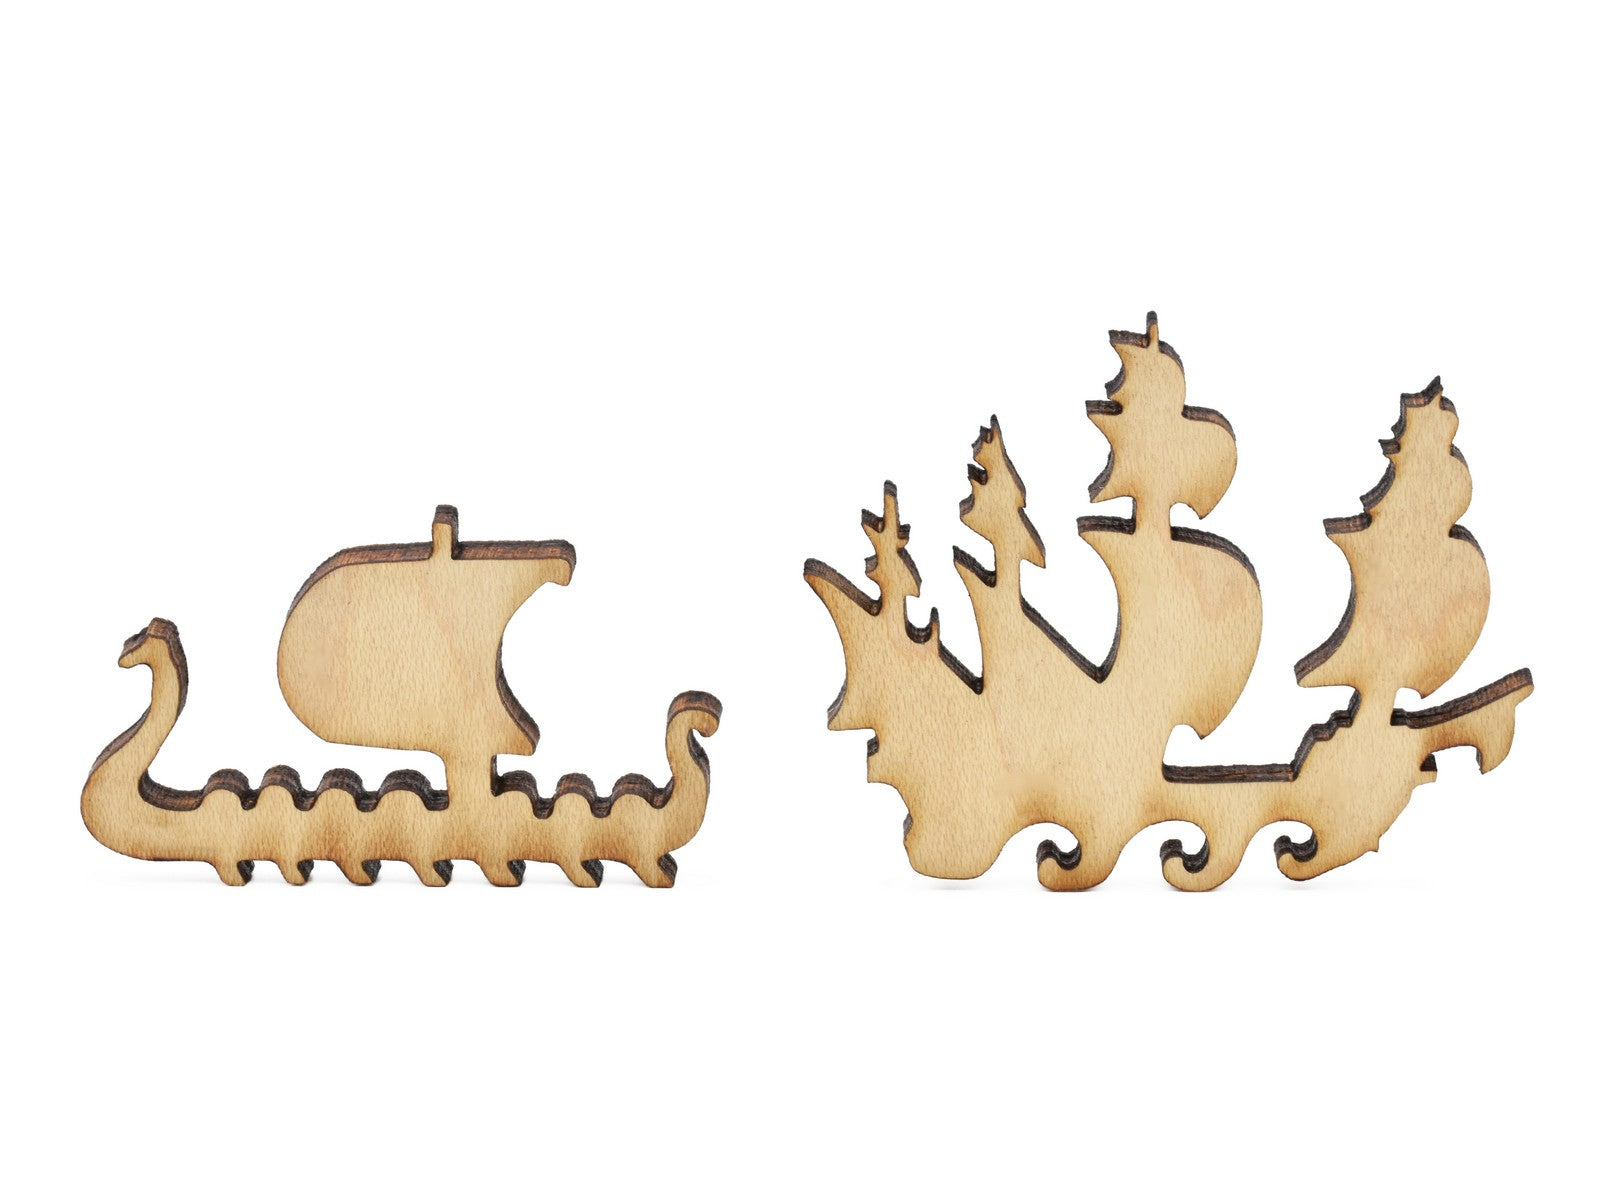 A closeup of pieces in the shape of two ships.